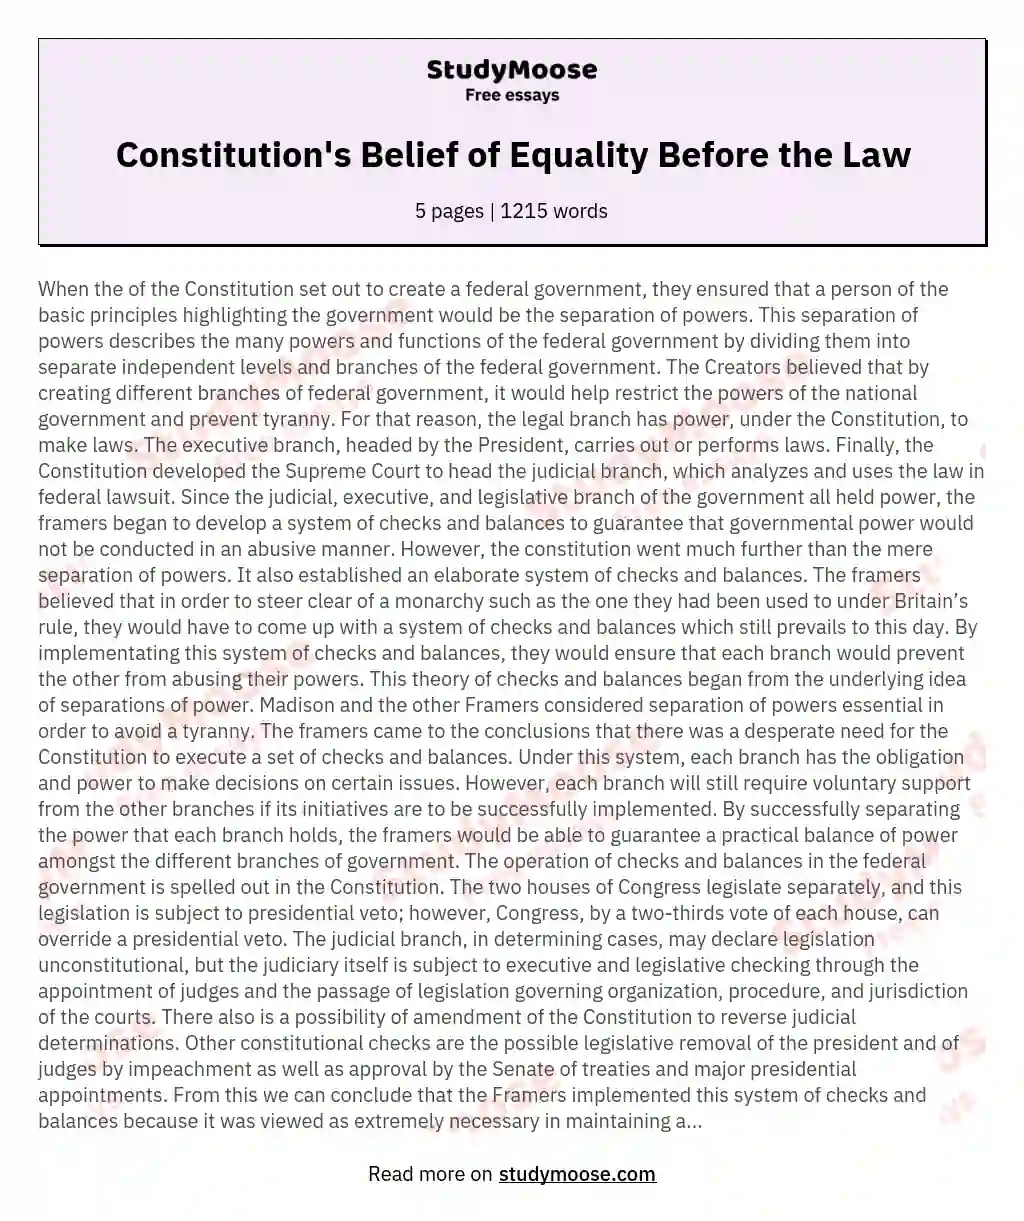 Constitution's Belief of Equality Before the Law essay